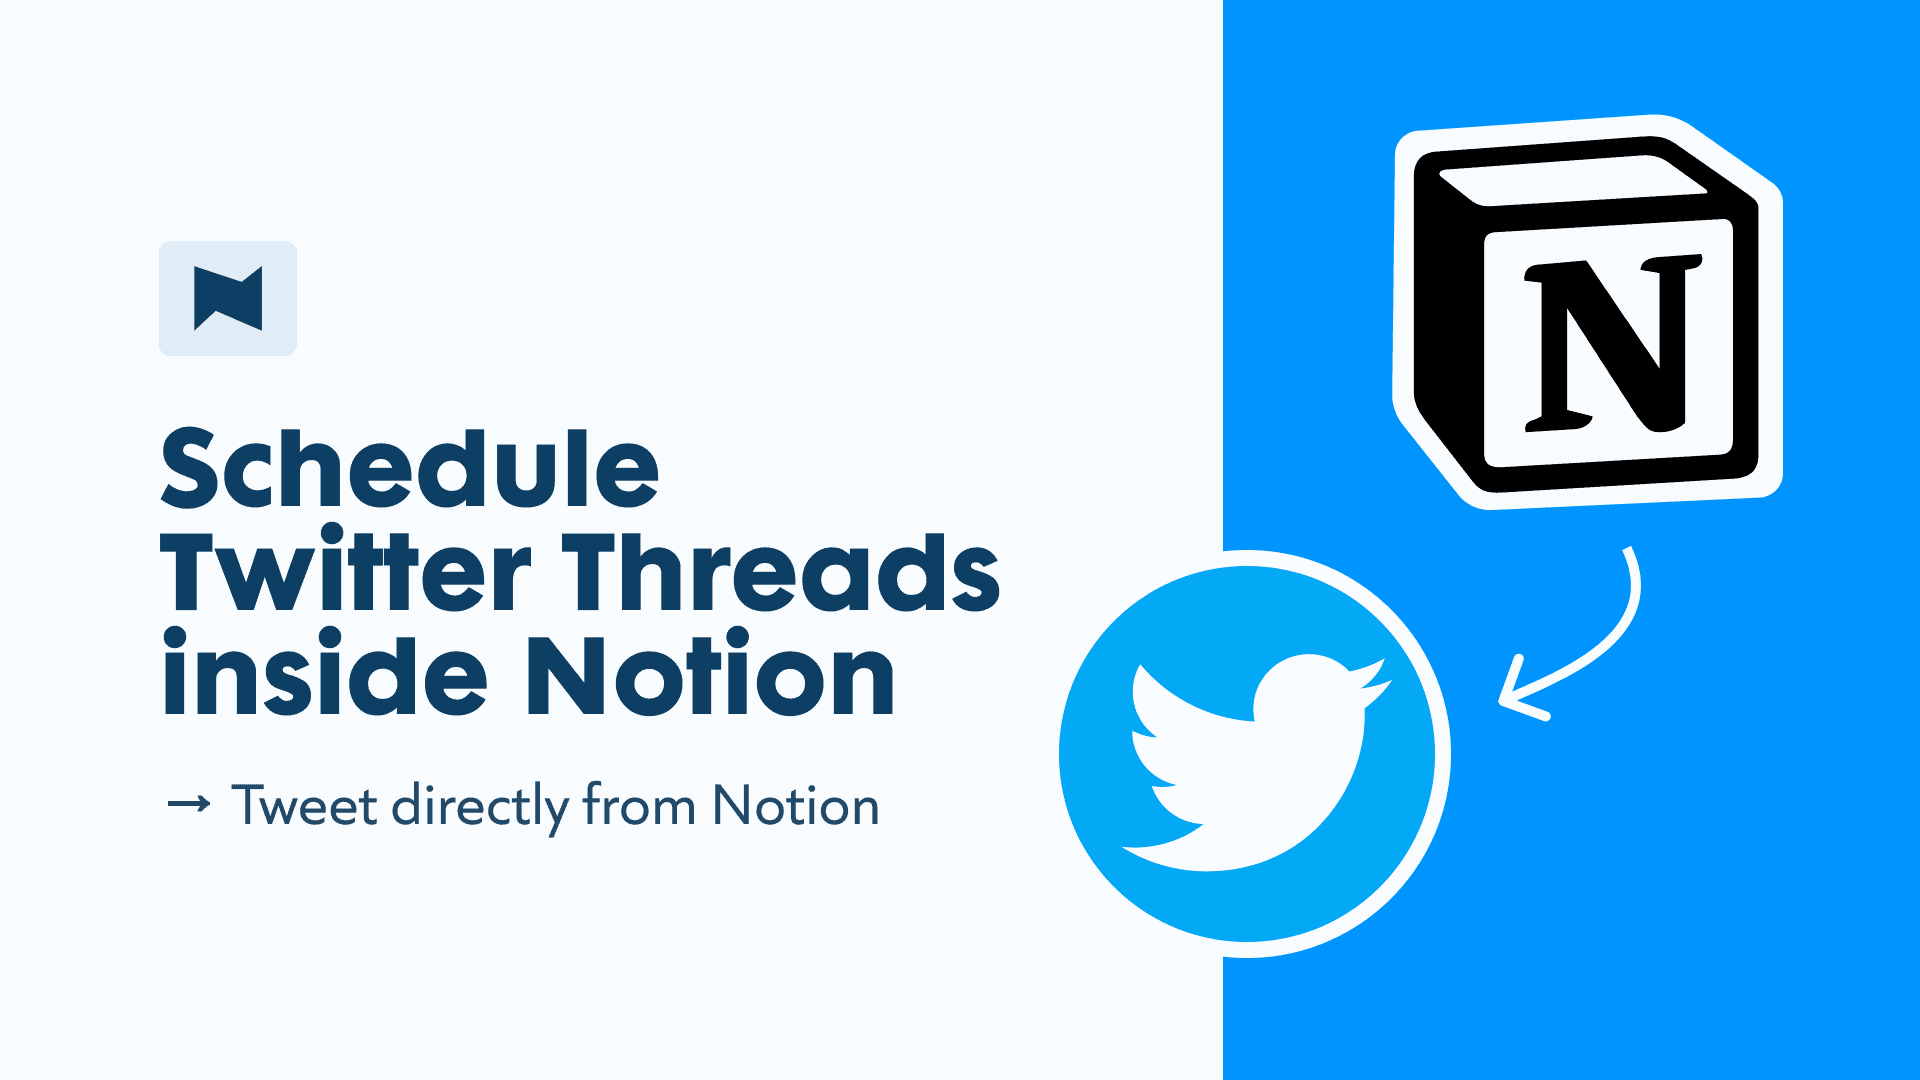 How to Schedule Twitter Threads with Notion (Step-by-Step Guide)